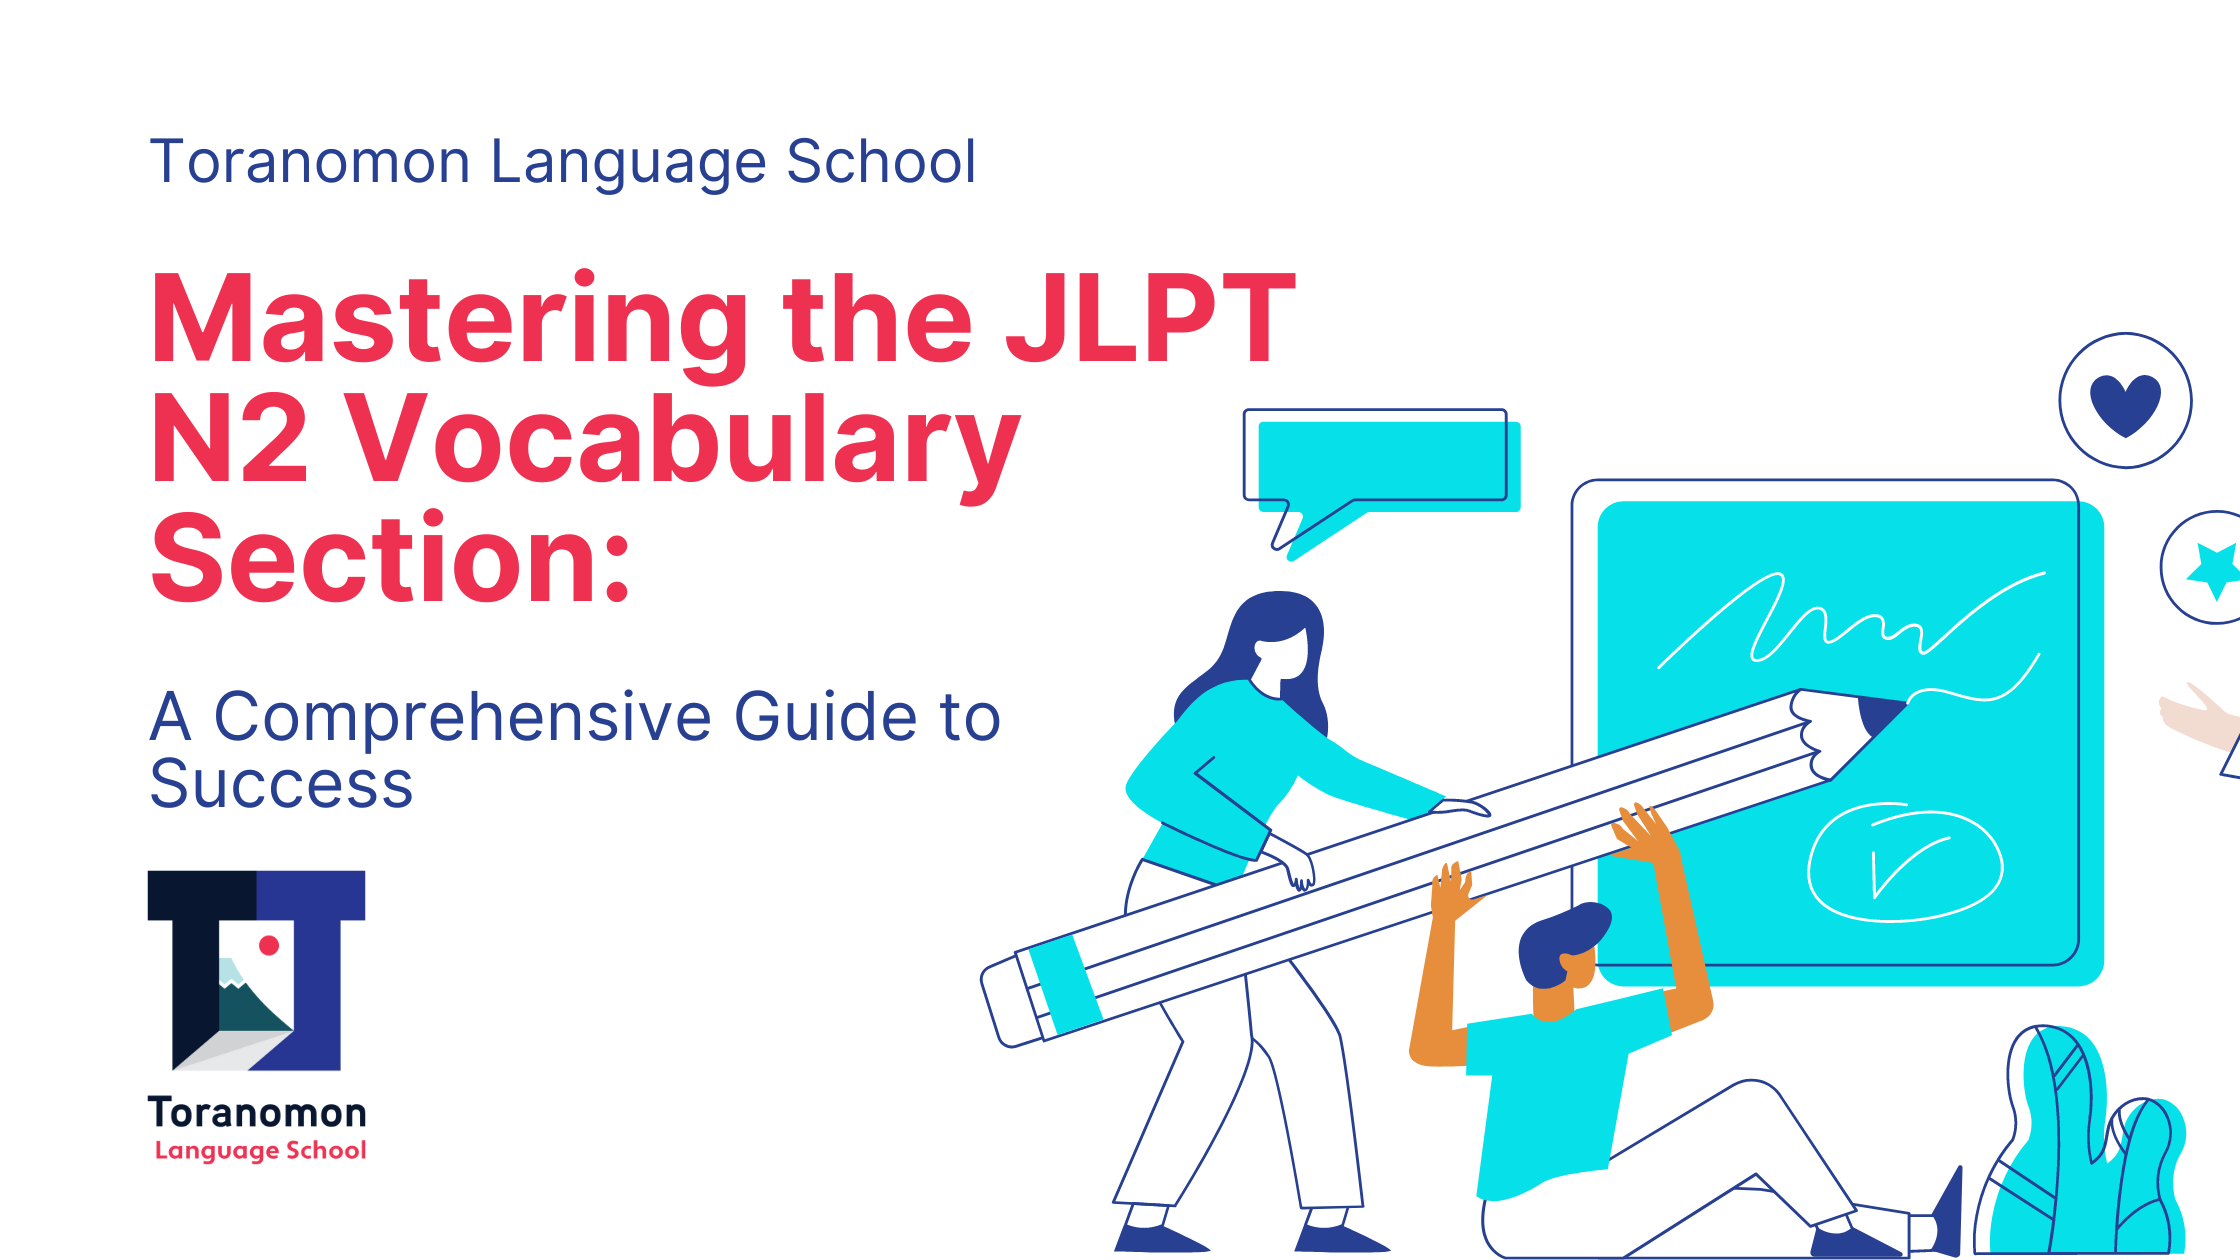 Mastering the JLPT N2 Vocabulary Section: A Comprehensive Guide to Success